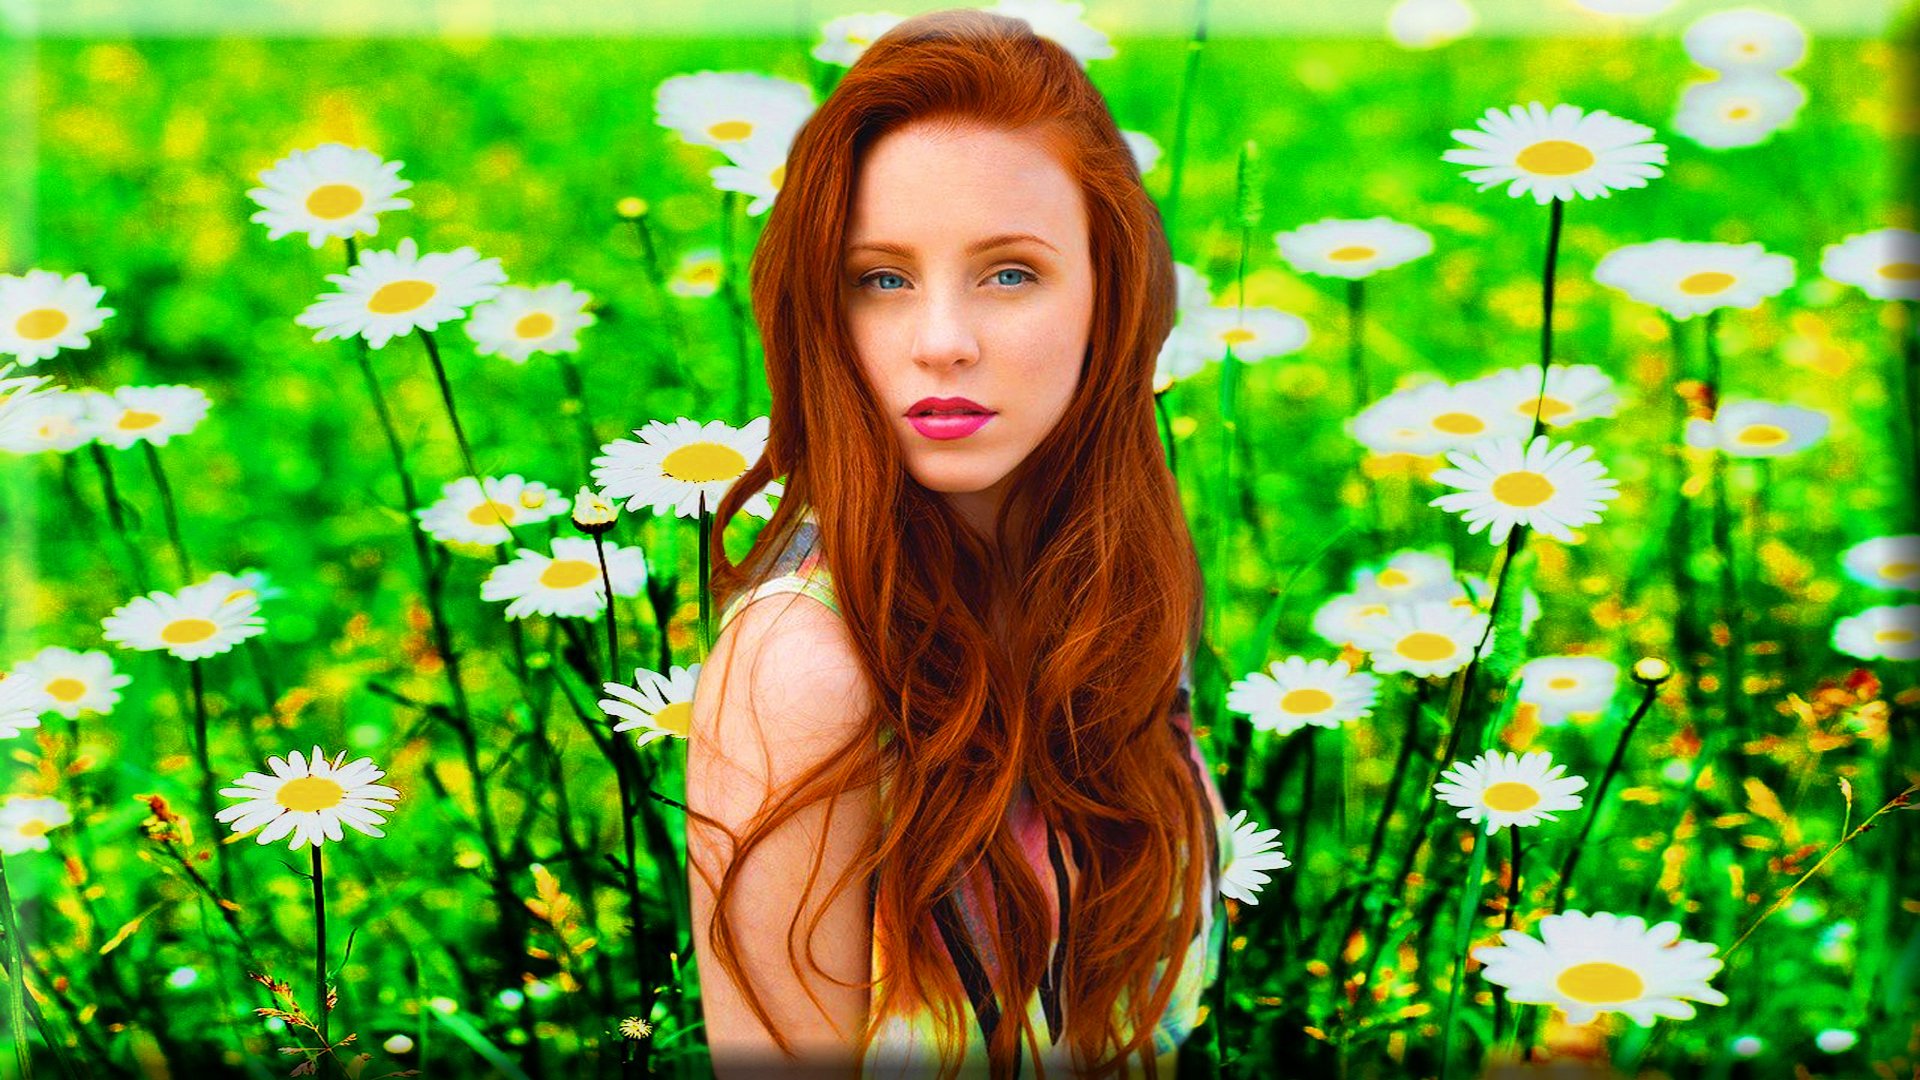 Redhead In The Daisies By Redheadsrule